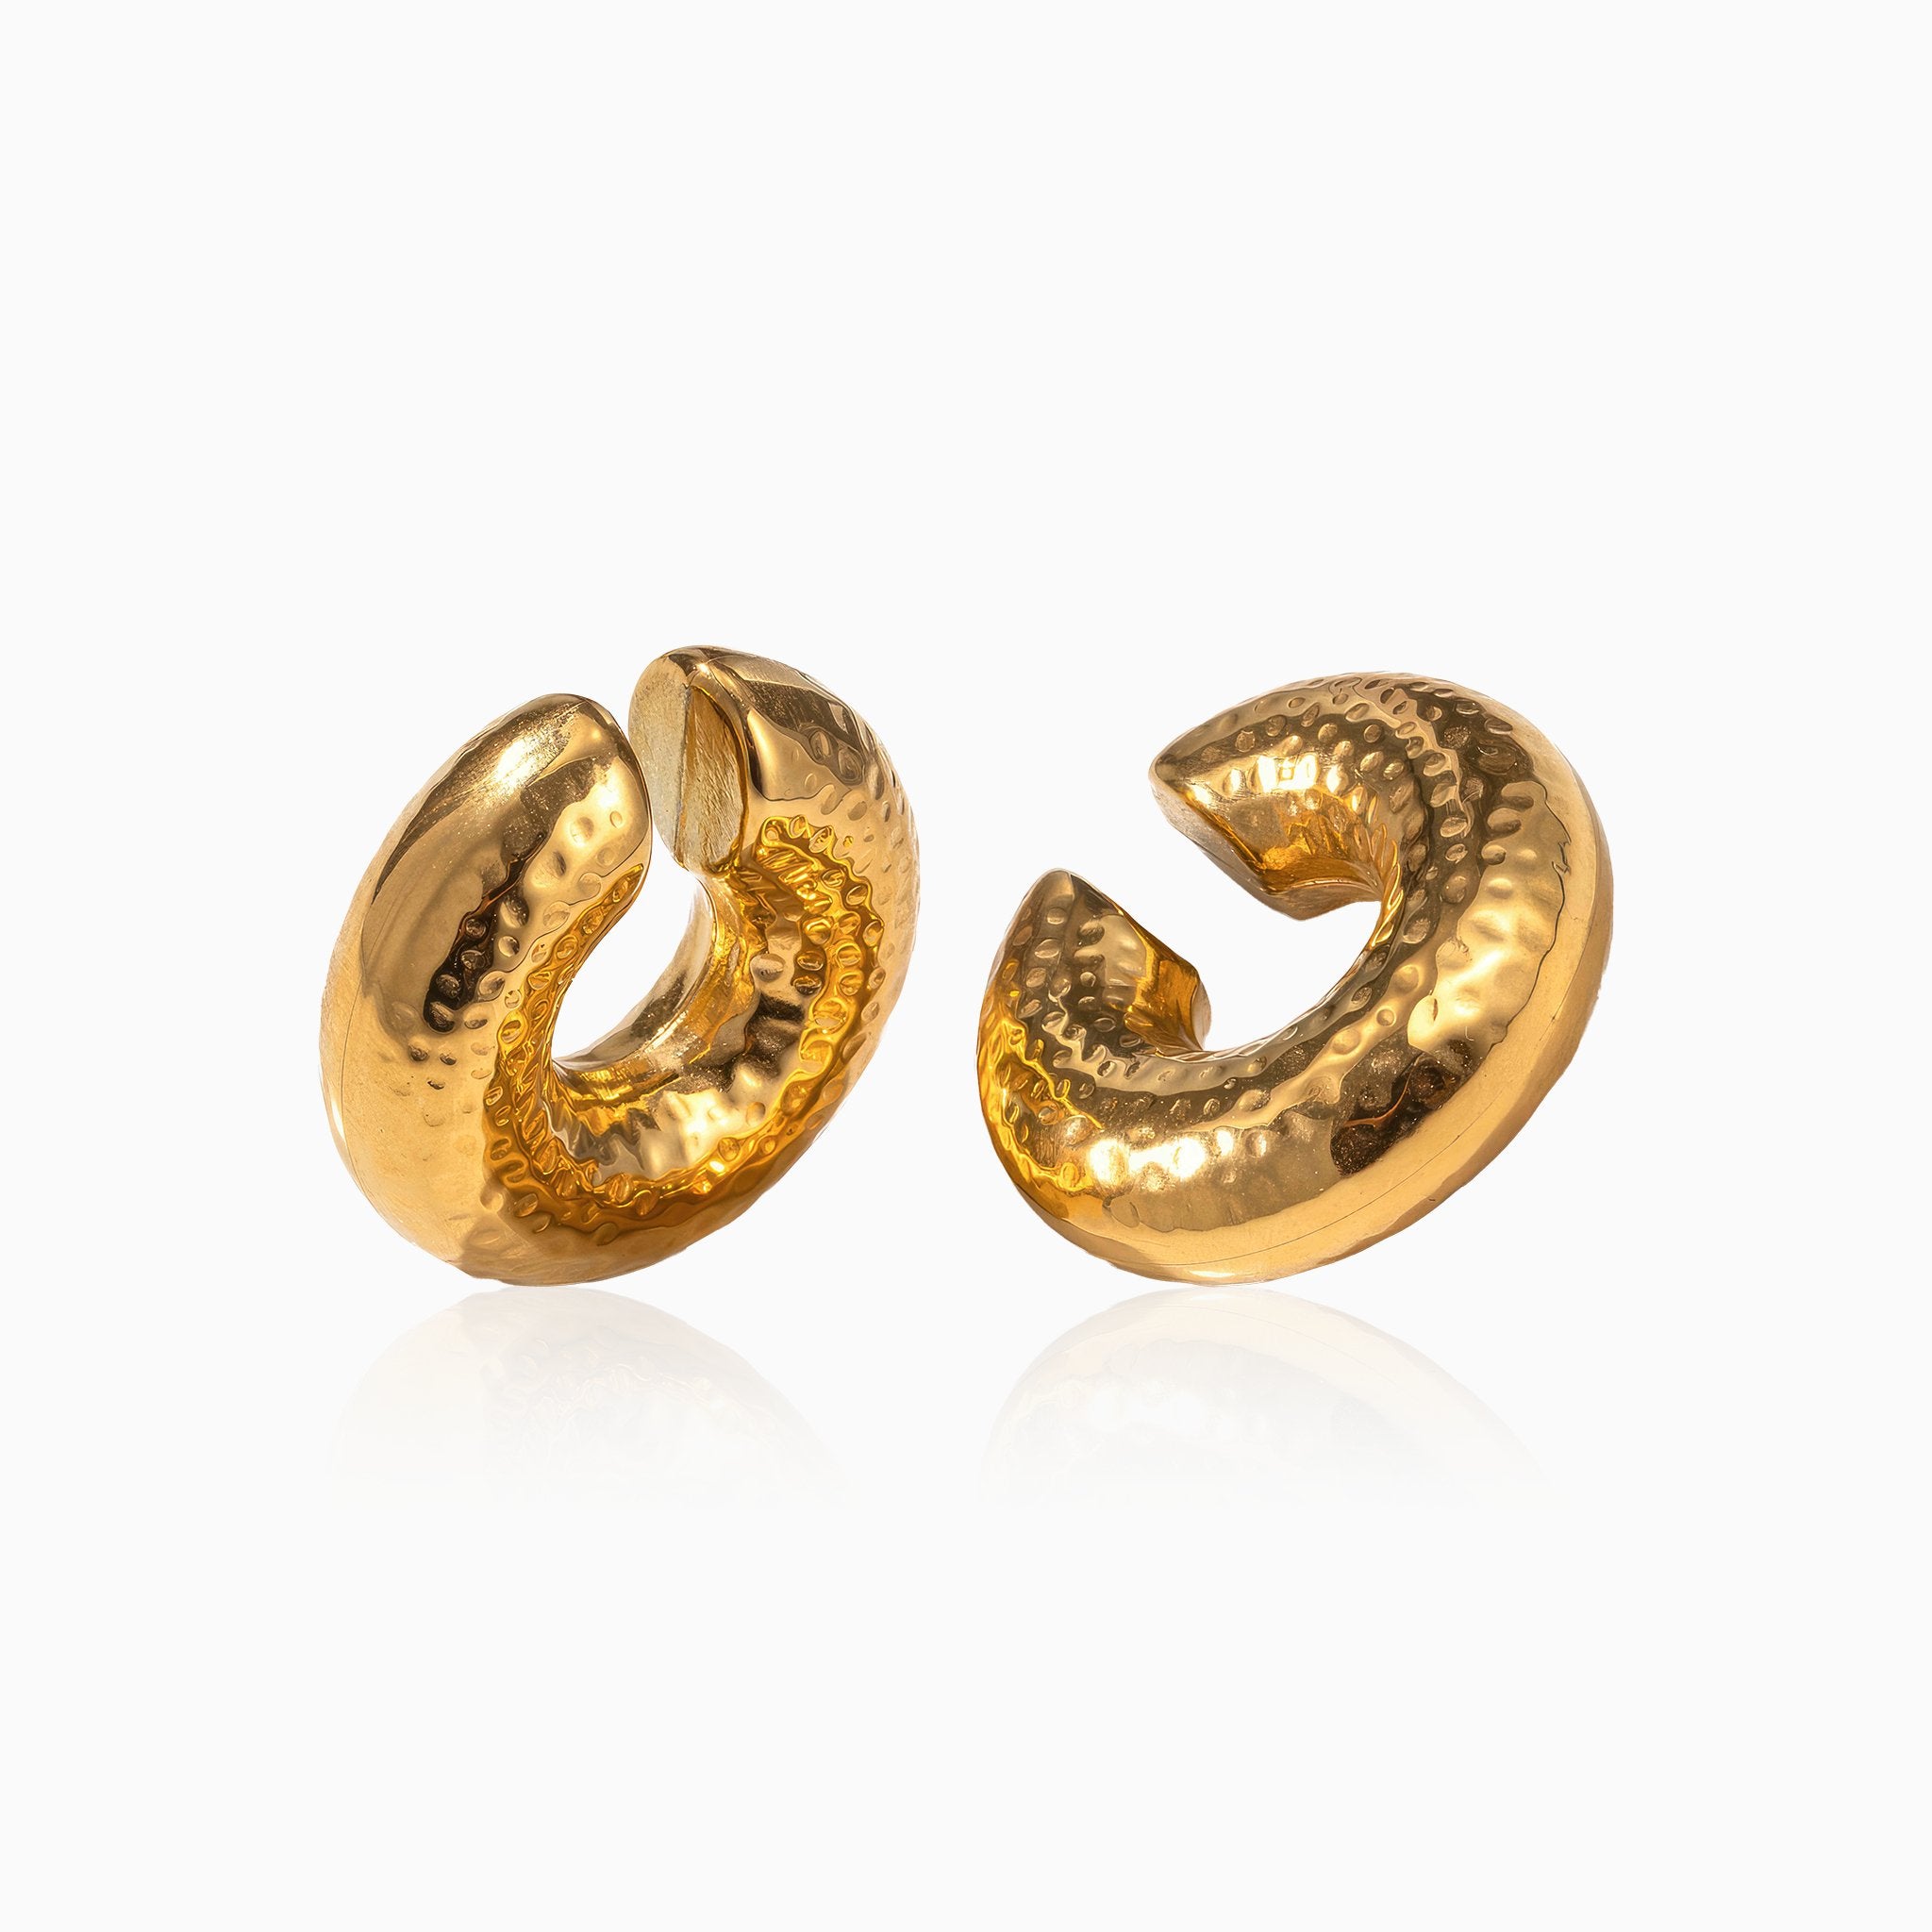 Textured Hollow Cylinder Earrings - Nobbier - Earrings - 18K Gold And Titanium PVD Coated Jewelry